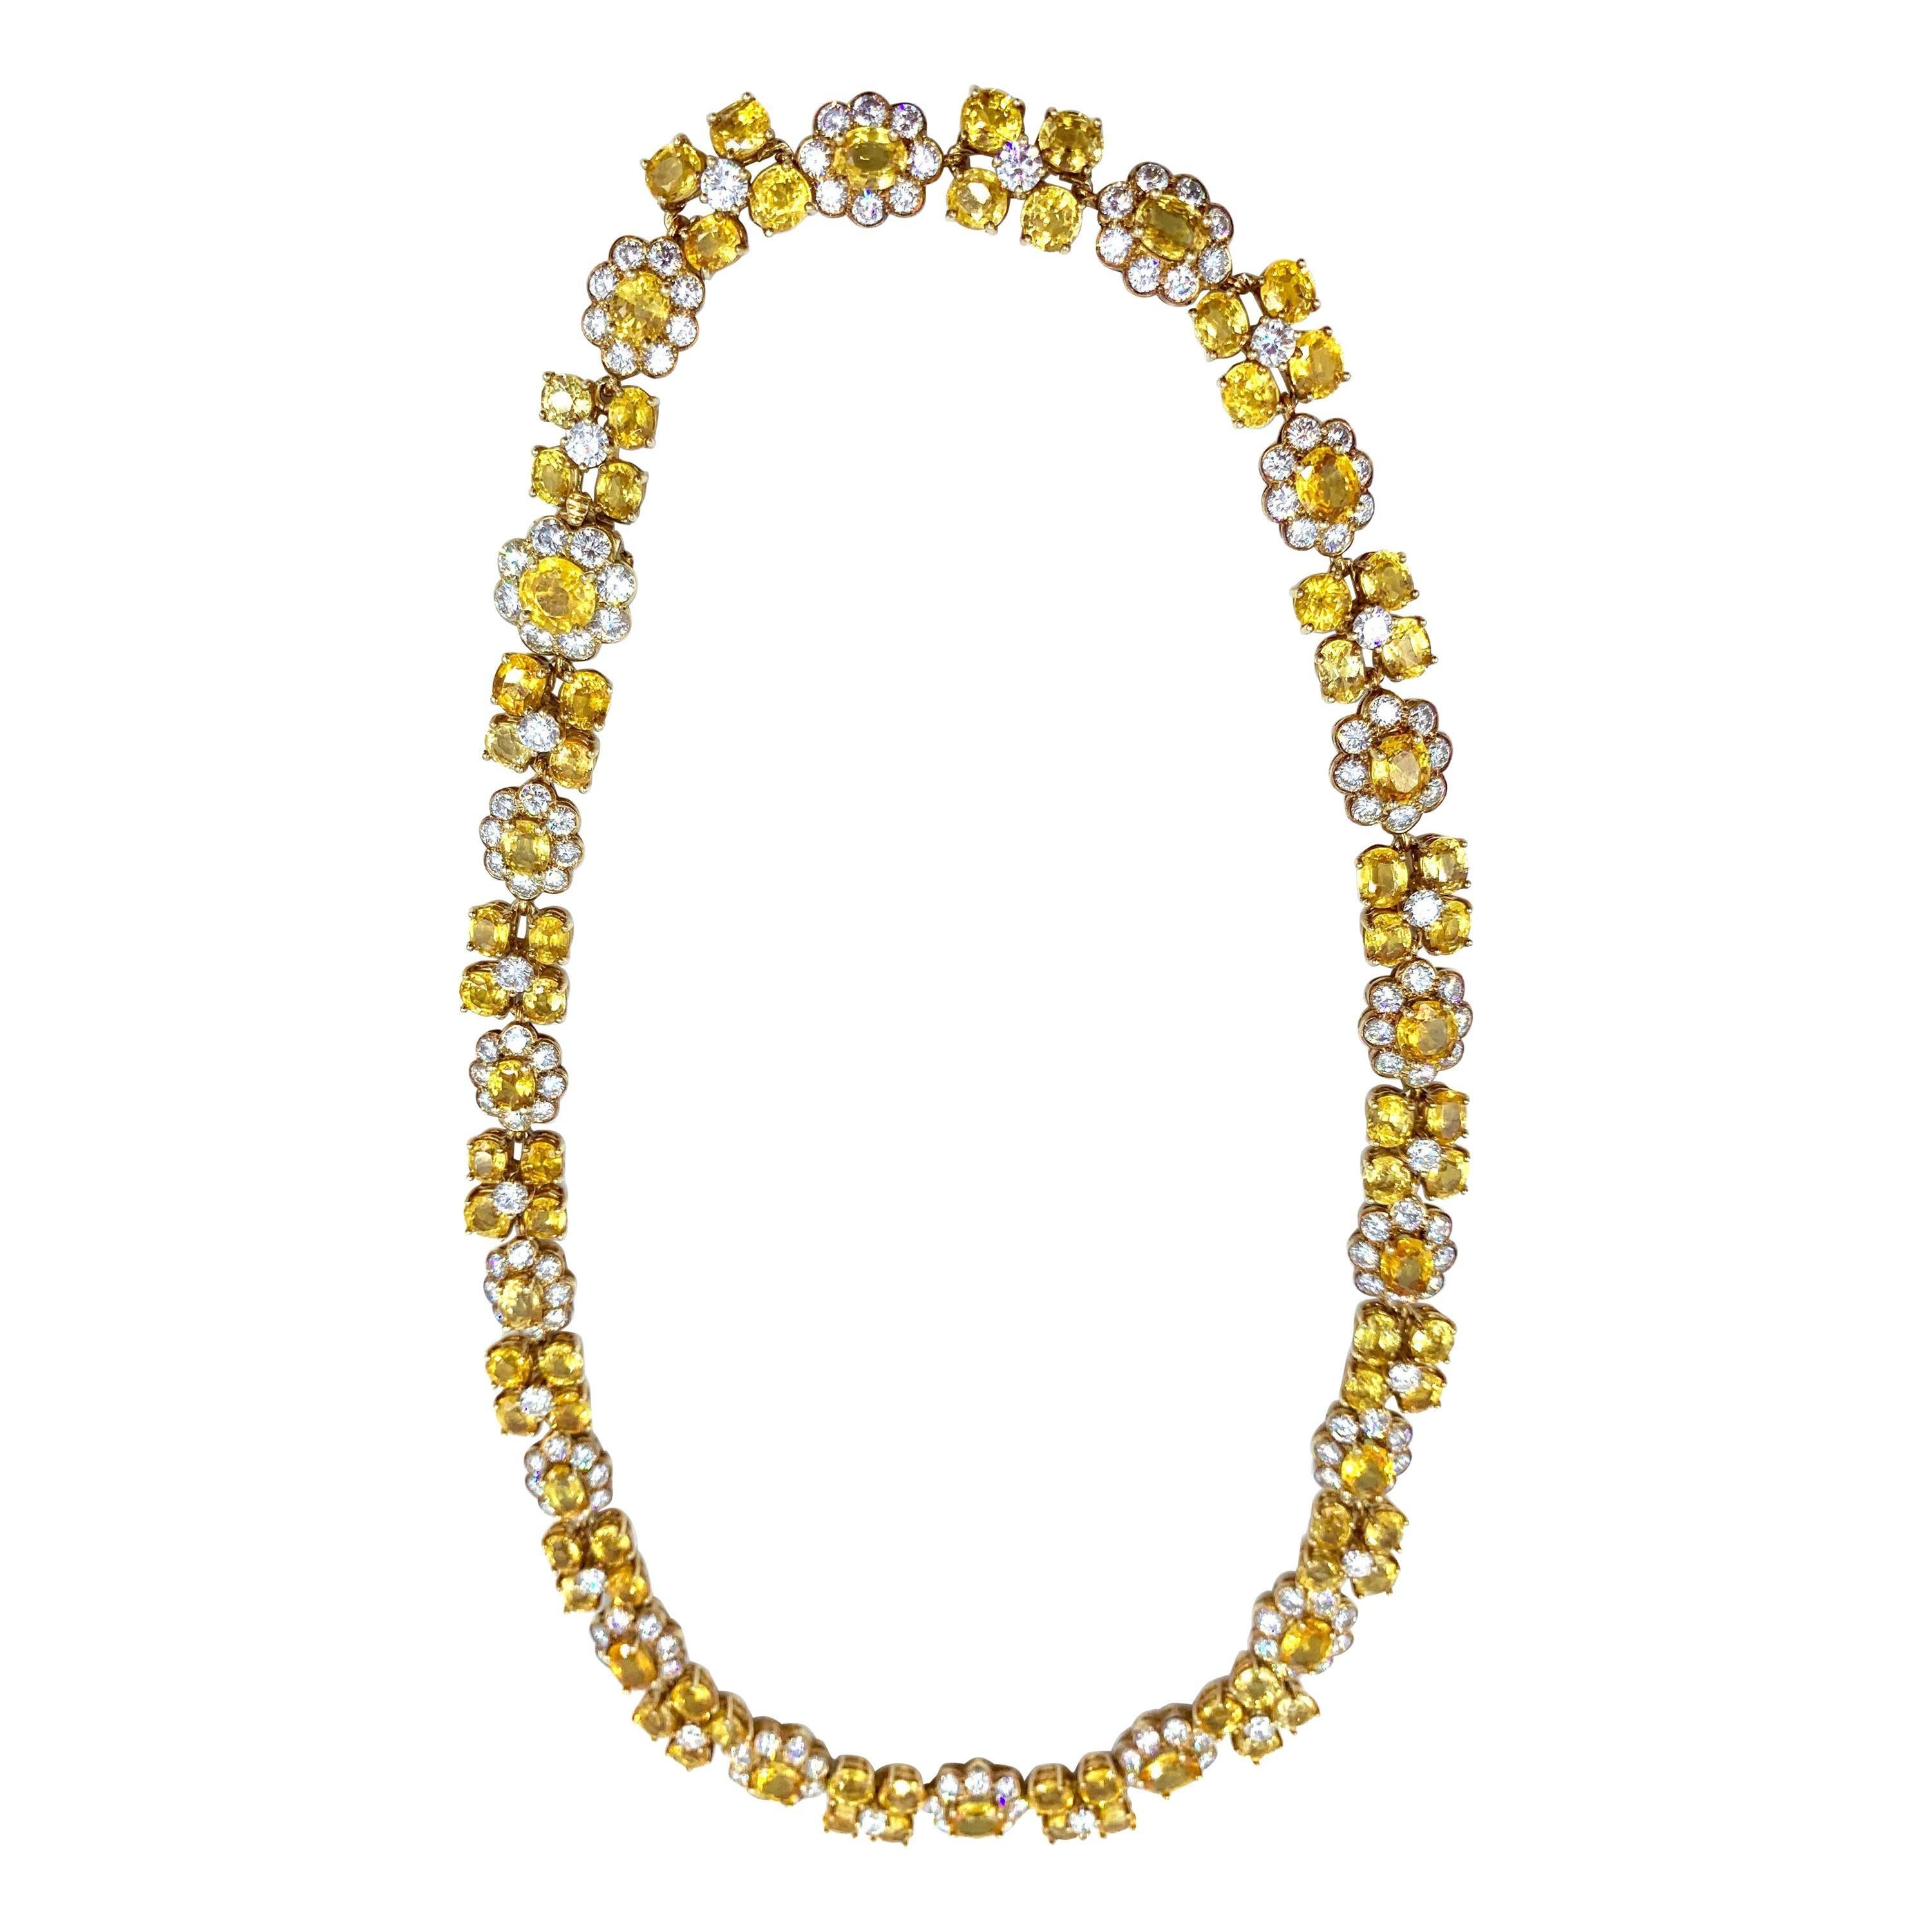 A natural yellow Ceylon sapphire diamond necklace by Van Cleef & Arpels. The necklace is beautifully finished in 18kt yellow gold followed by a pattern of sapphires and diamonds. The necklace is 17.50 in long. The Yellow Sapphire is 65.0 carats and